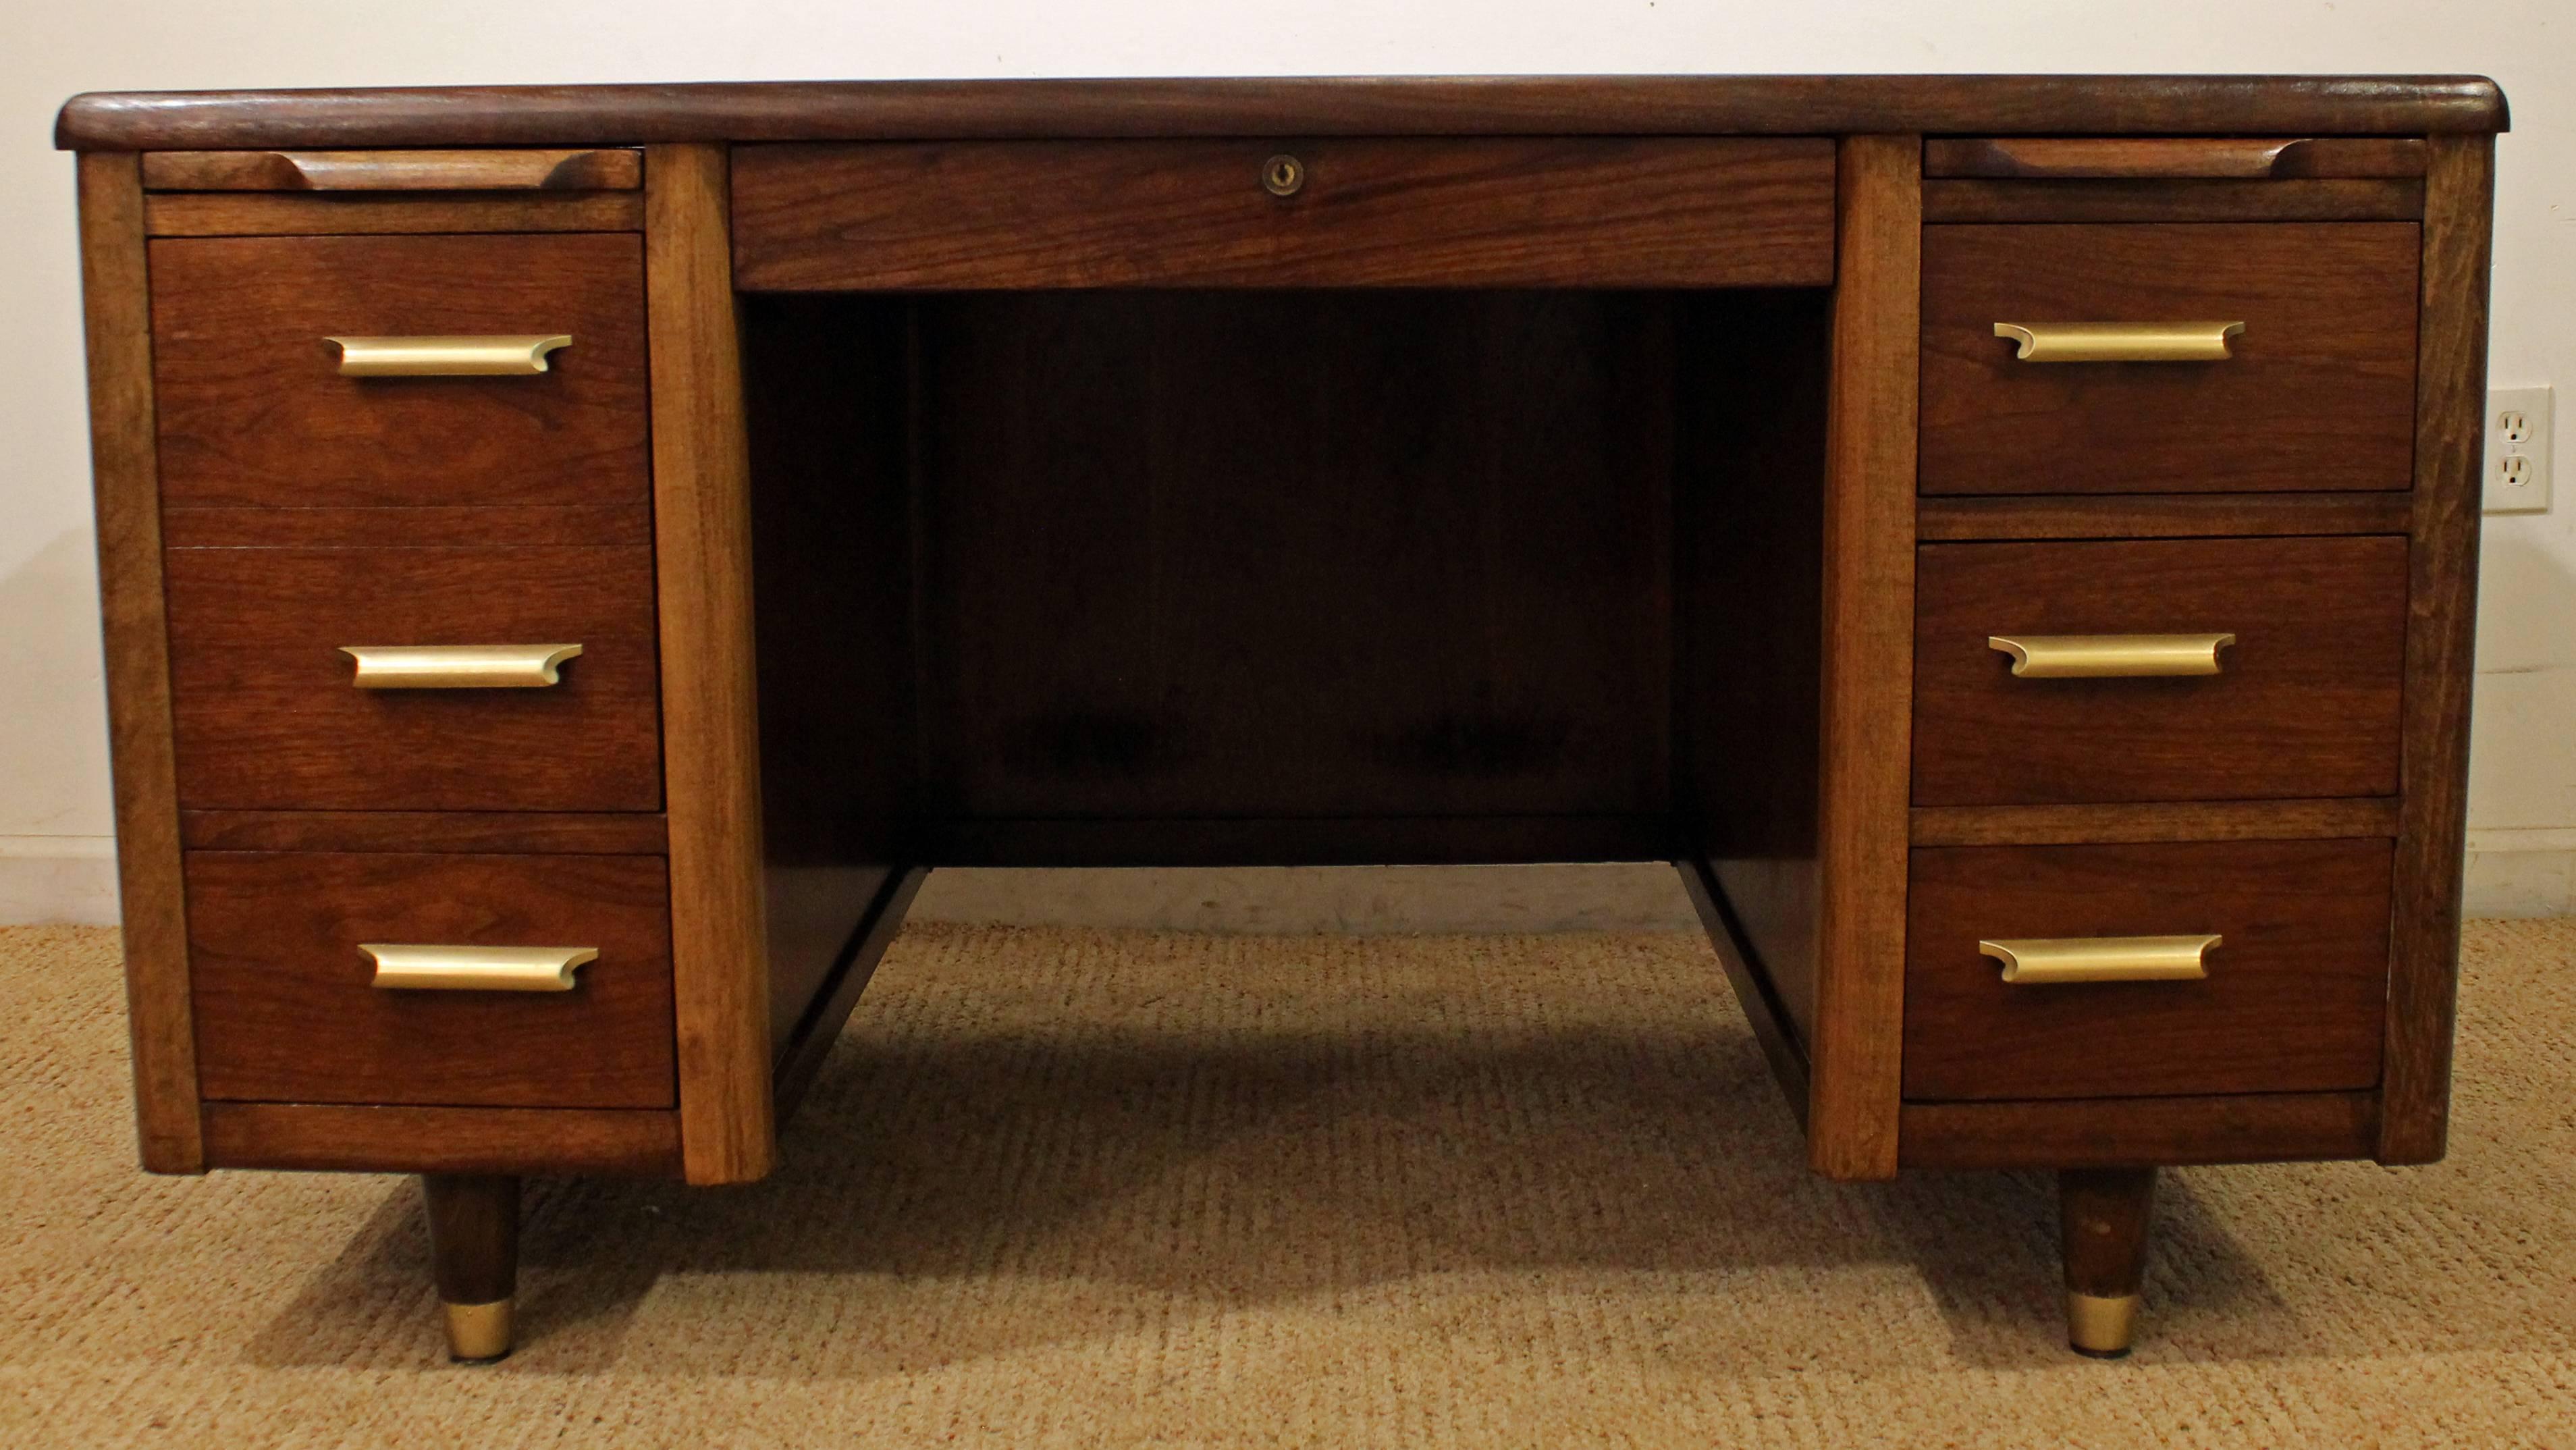 This is a walnut desk that features six dovetailed drawers and two pull-out leaves. It has a lock on the middle drawer, but we do not have the key. Has been completely restored/refinished.